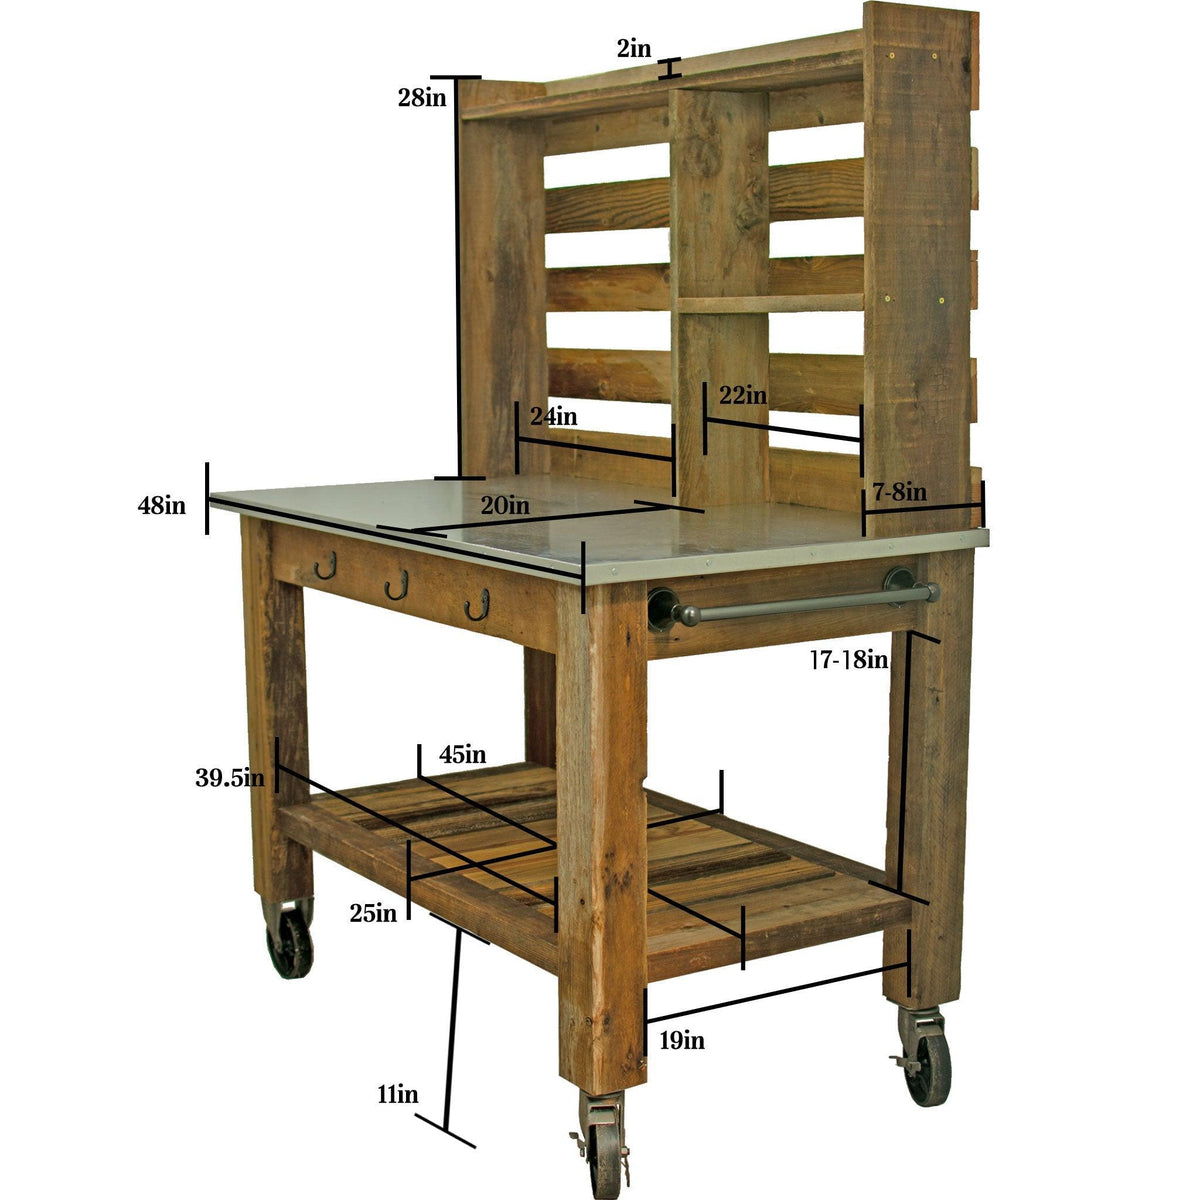 The dimensions and specs of Lee Display's Outdoor Redwood Potting Table. On sale at leedisplay.com